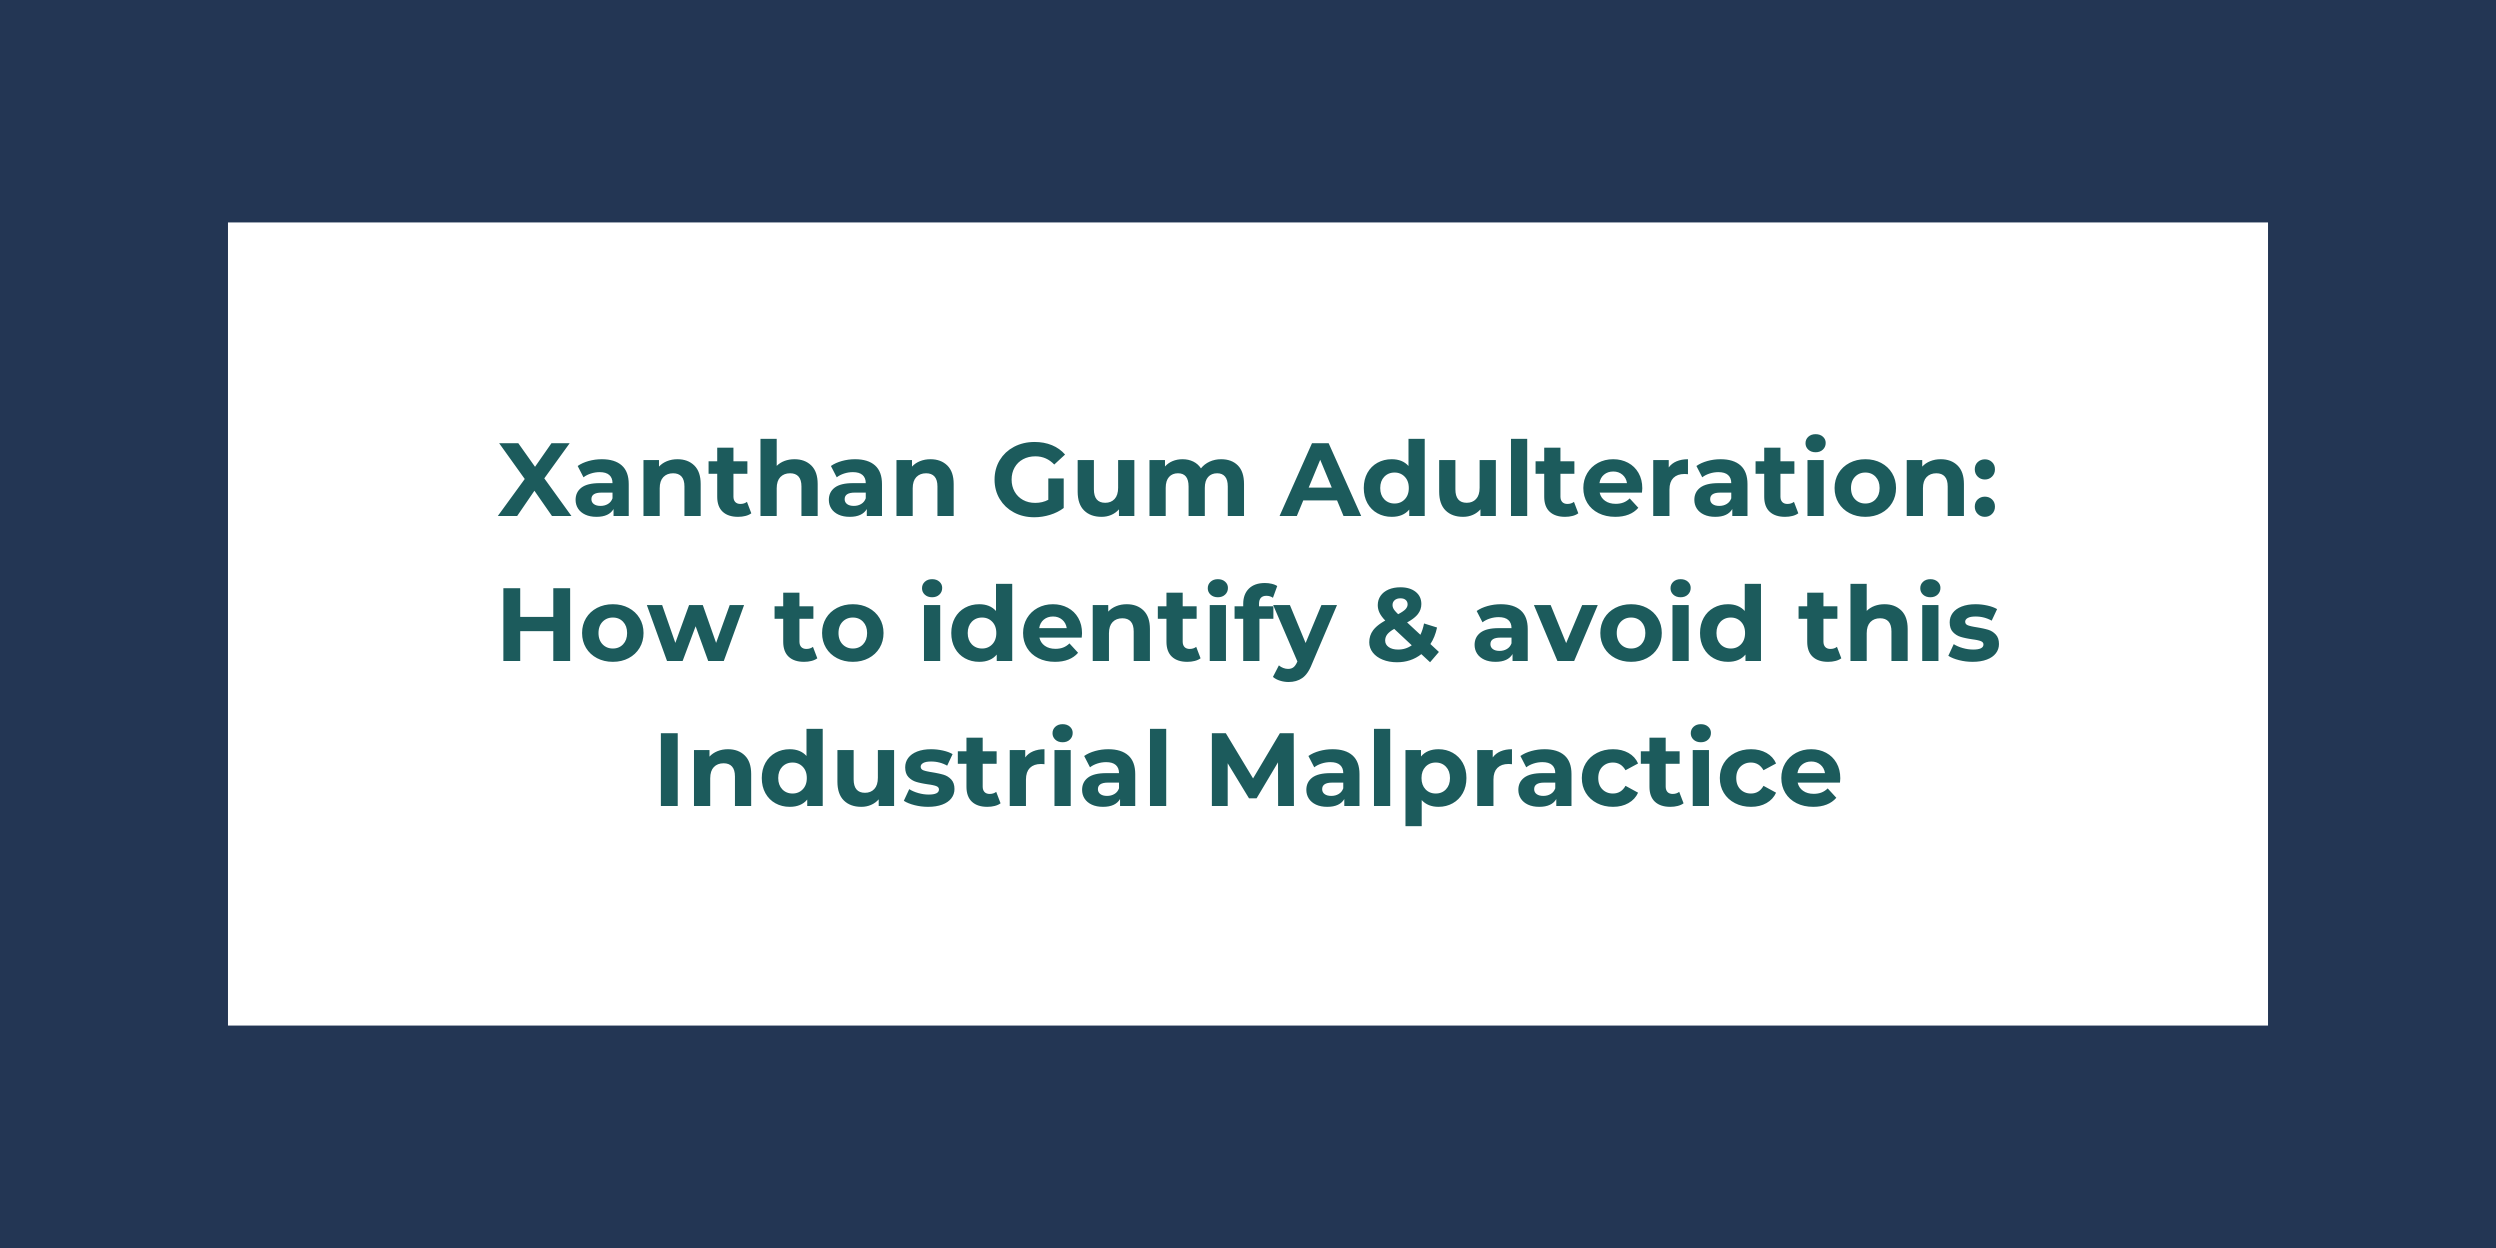 Xanthan Gum Adulteration: How to identify & avoid this Industrial Malpractice